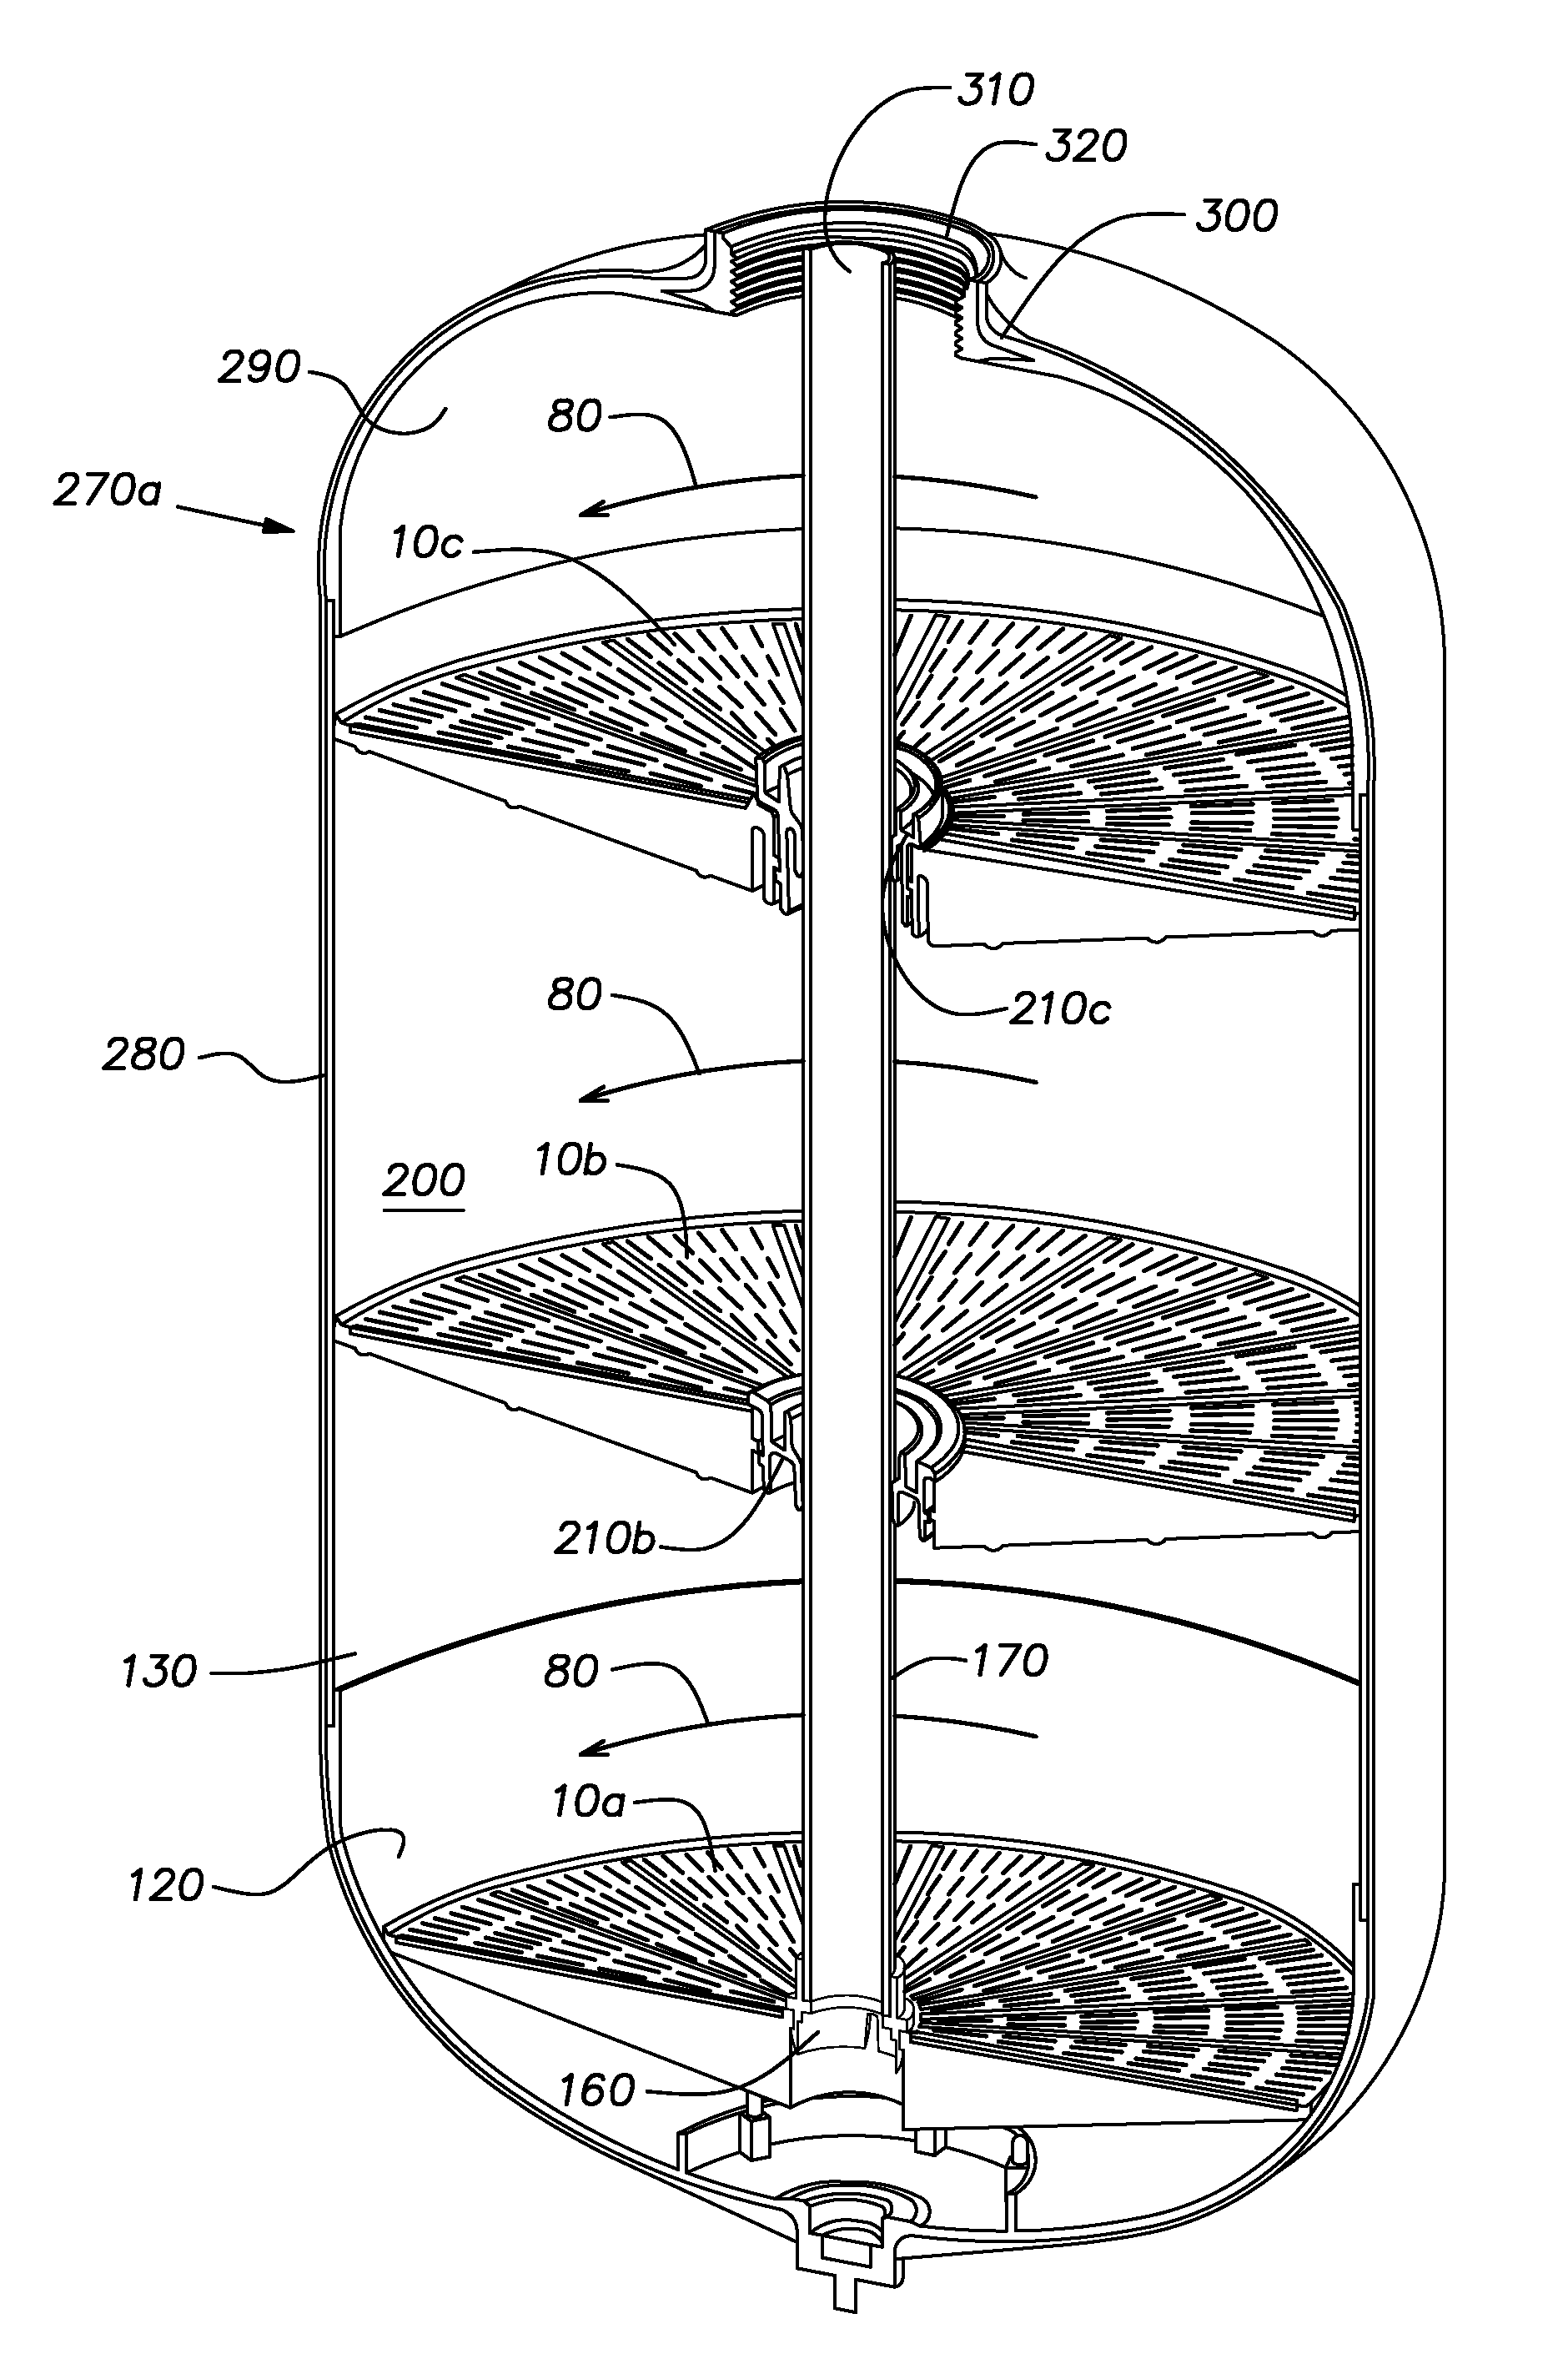 Distributor plates for composite pressure vessel assemblies and methods